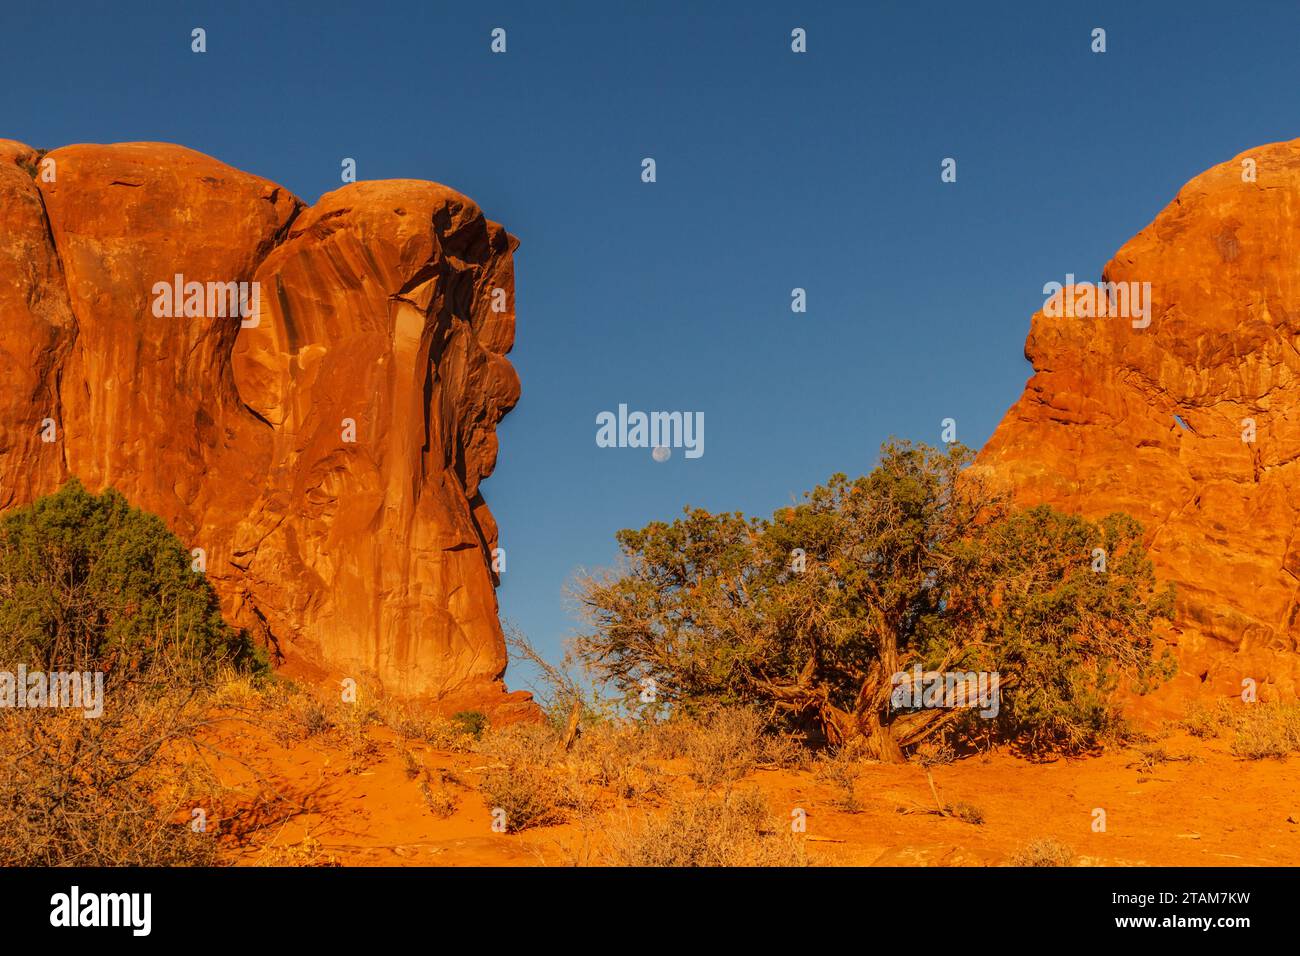 Sandstone rock formations in early morning light in Arches National Park in Utah. Stock Photo